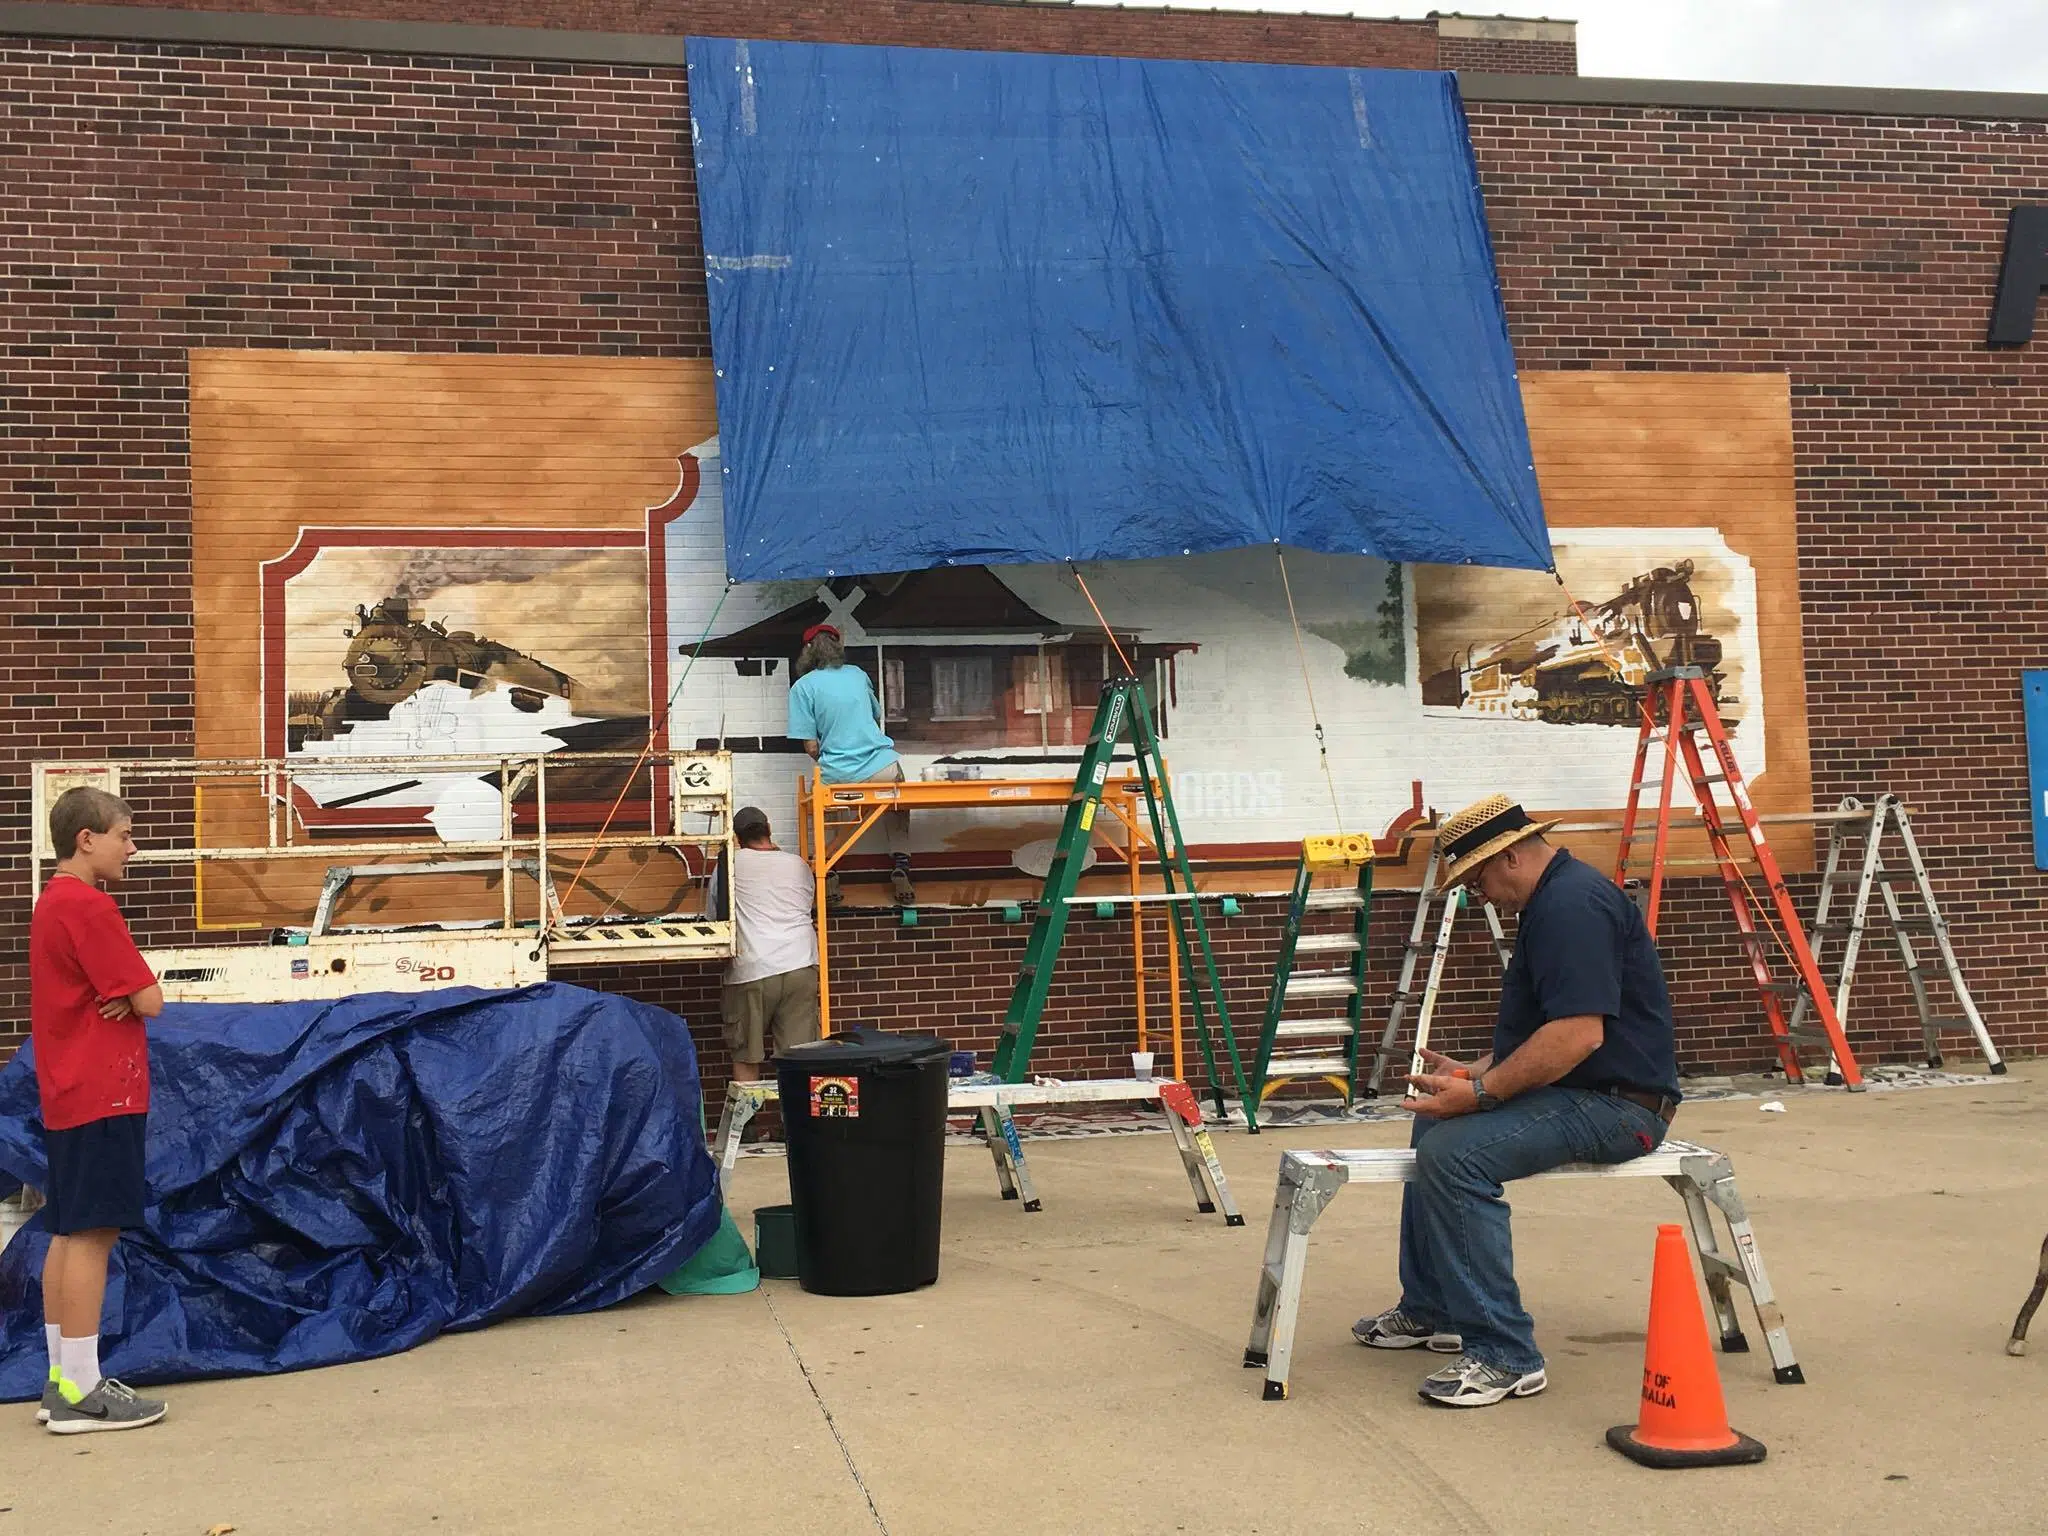 Downtown Mural work continues with "Little Toot" giving rides to Children